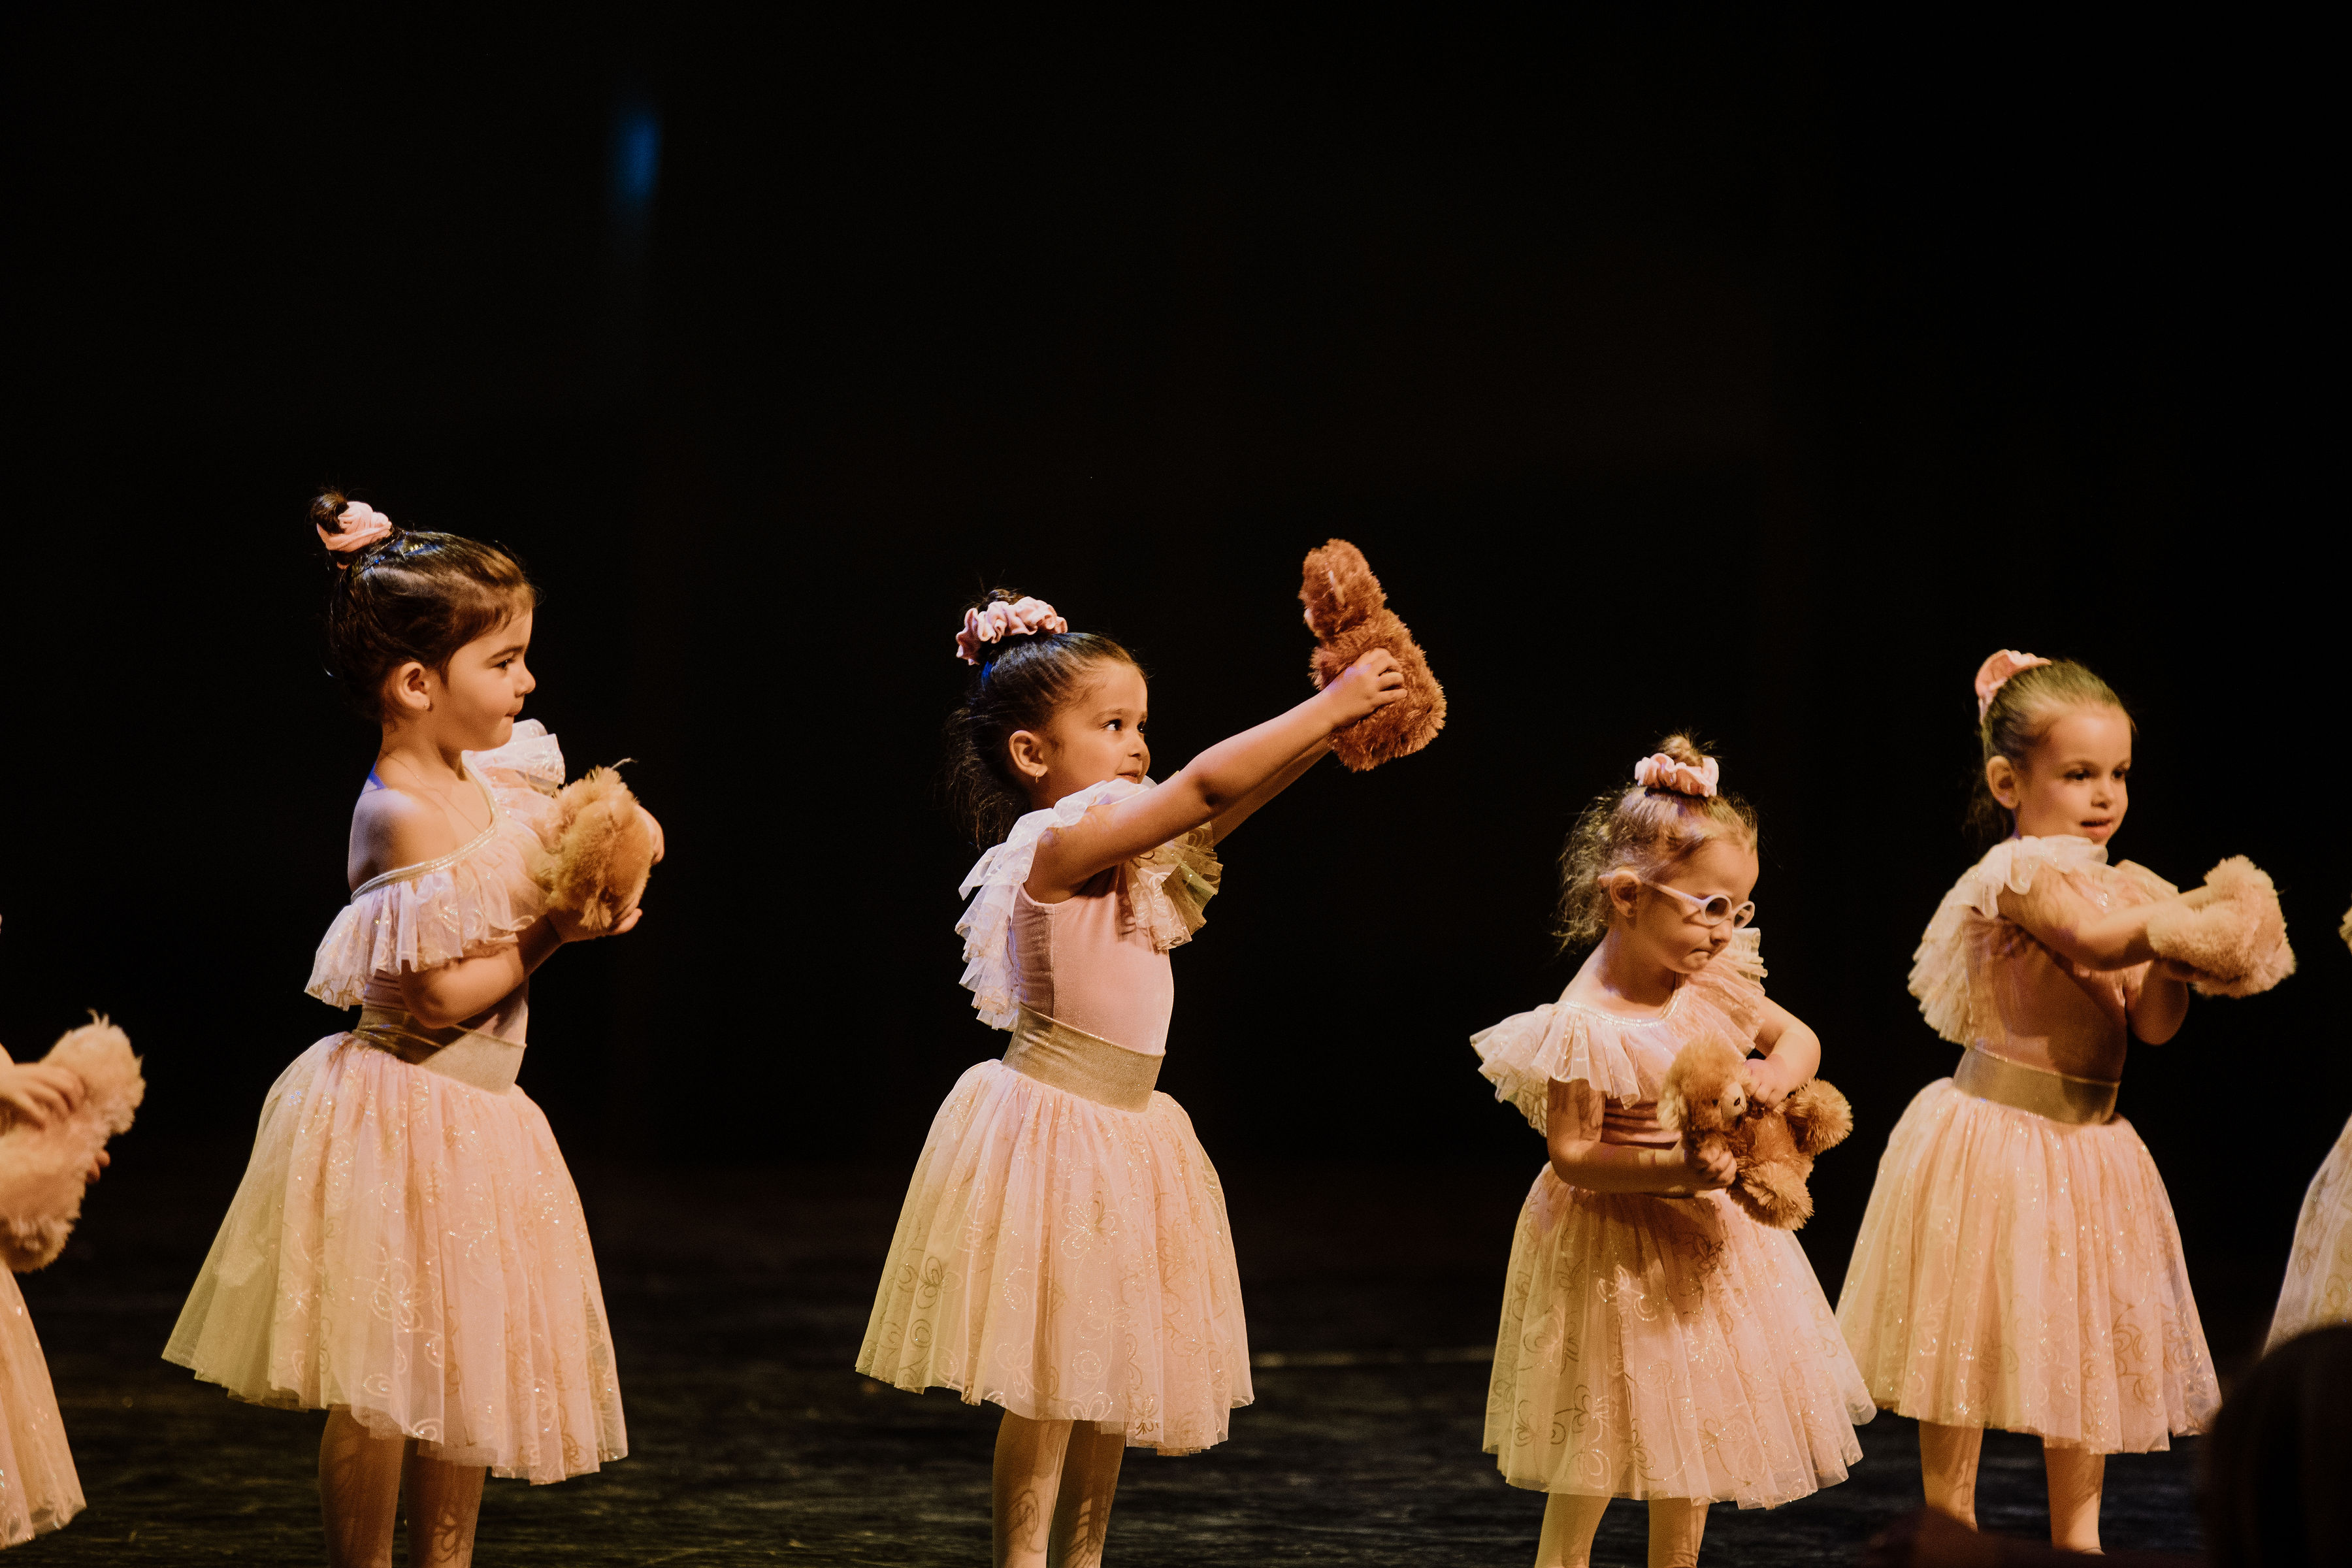 Four dancers holding bears during a ballet routine on stage